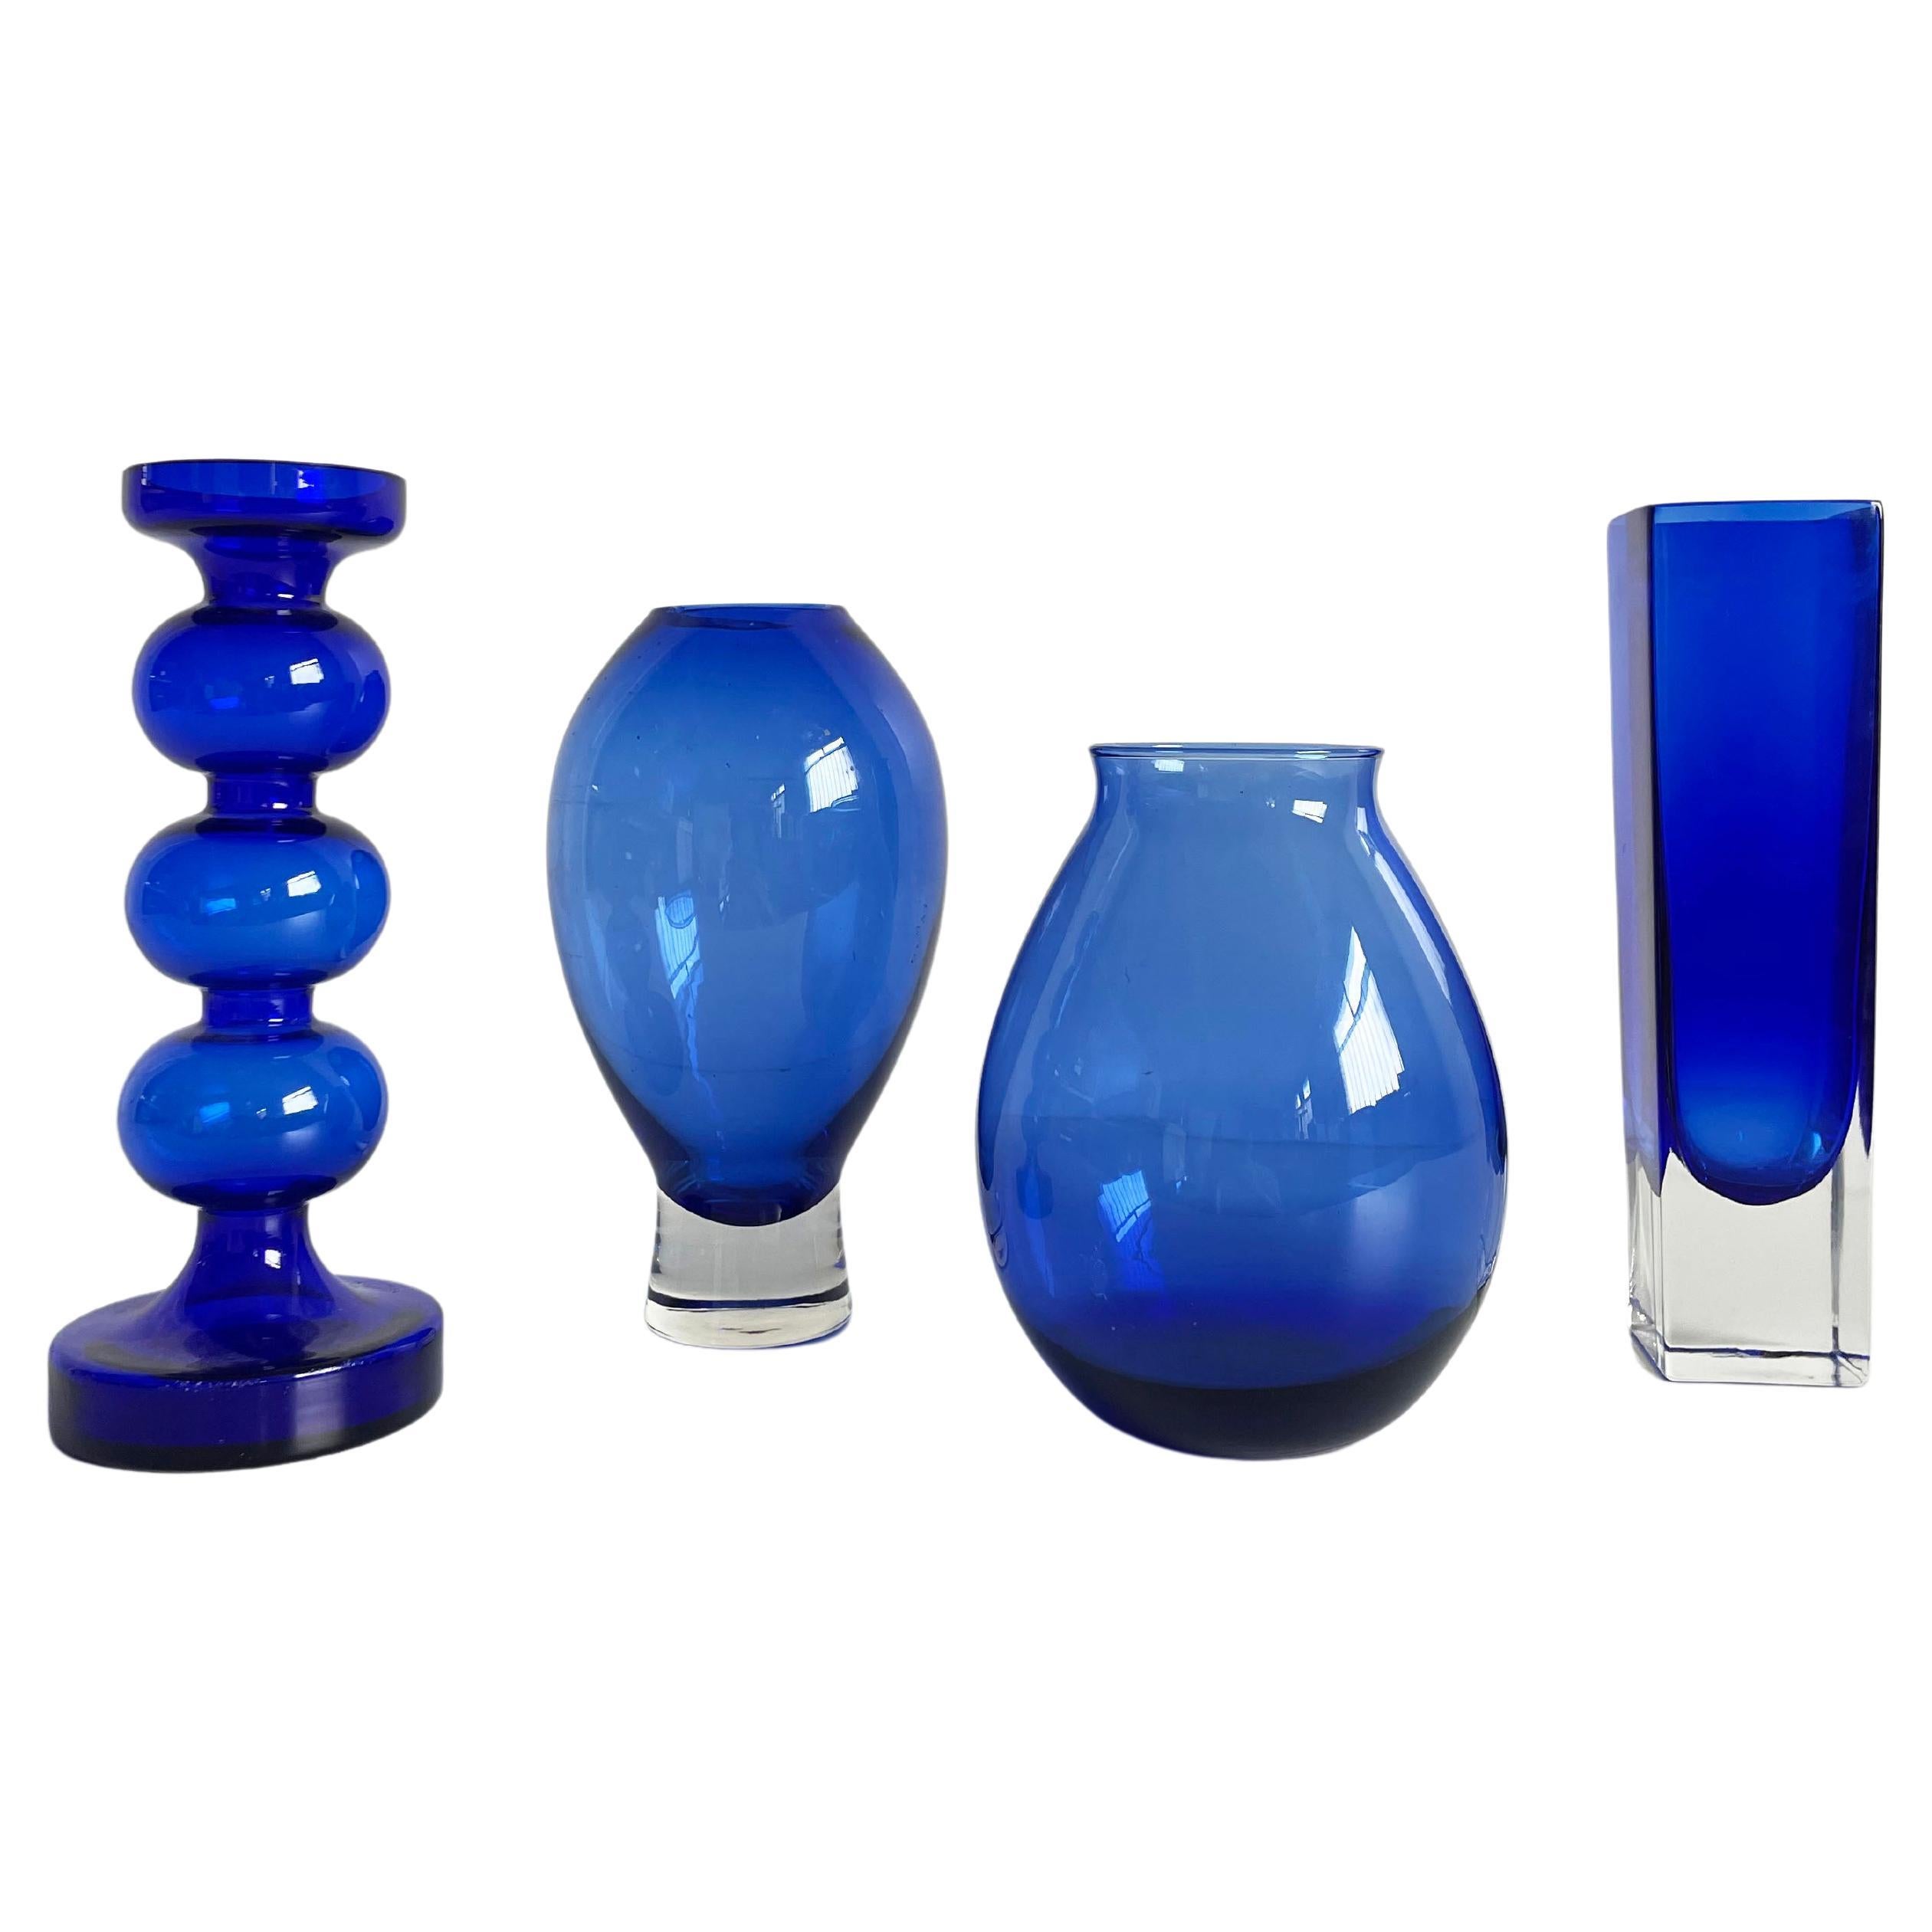 Collection of Scandinavian Art Glass, Set of 4 diverse Blue Glass Vases For Sale